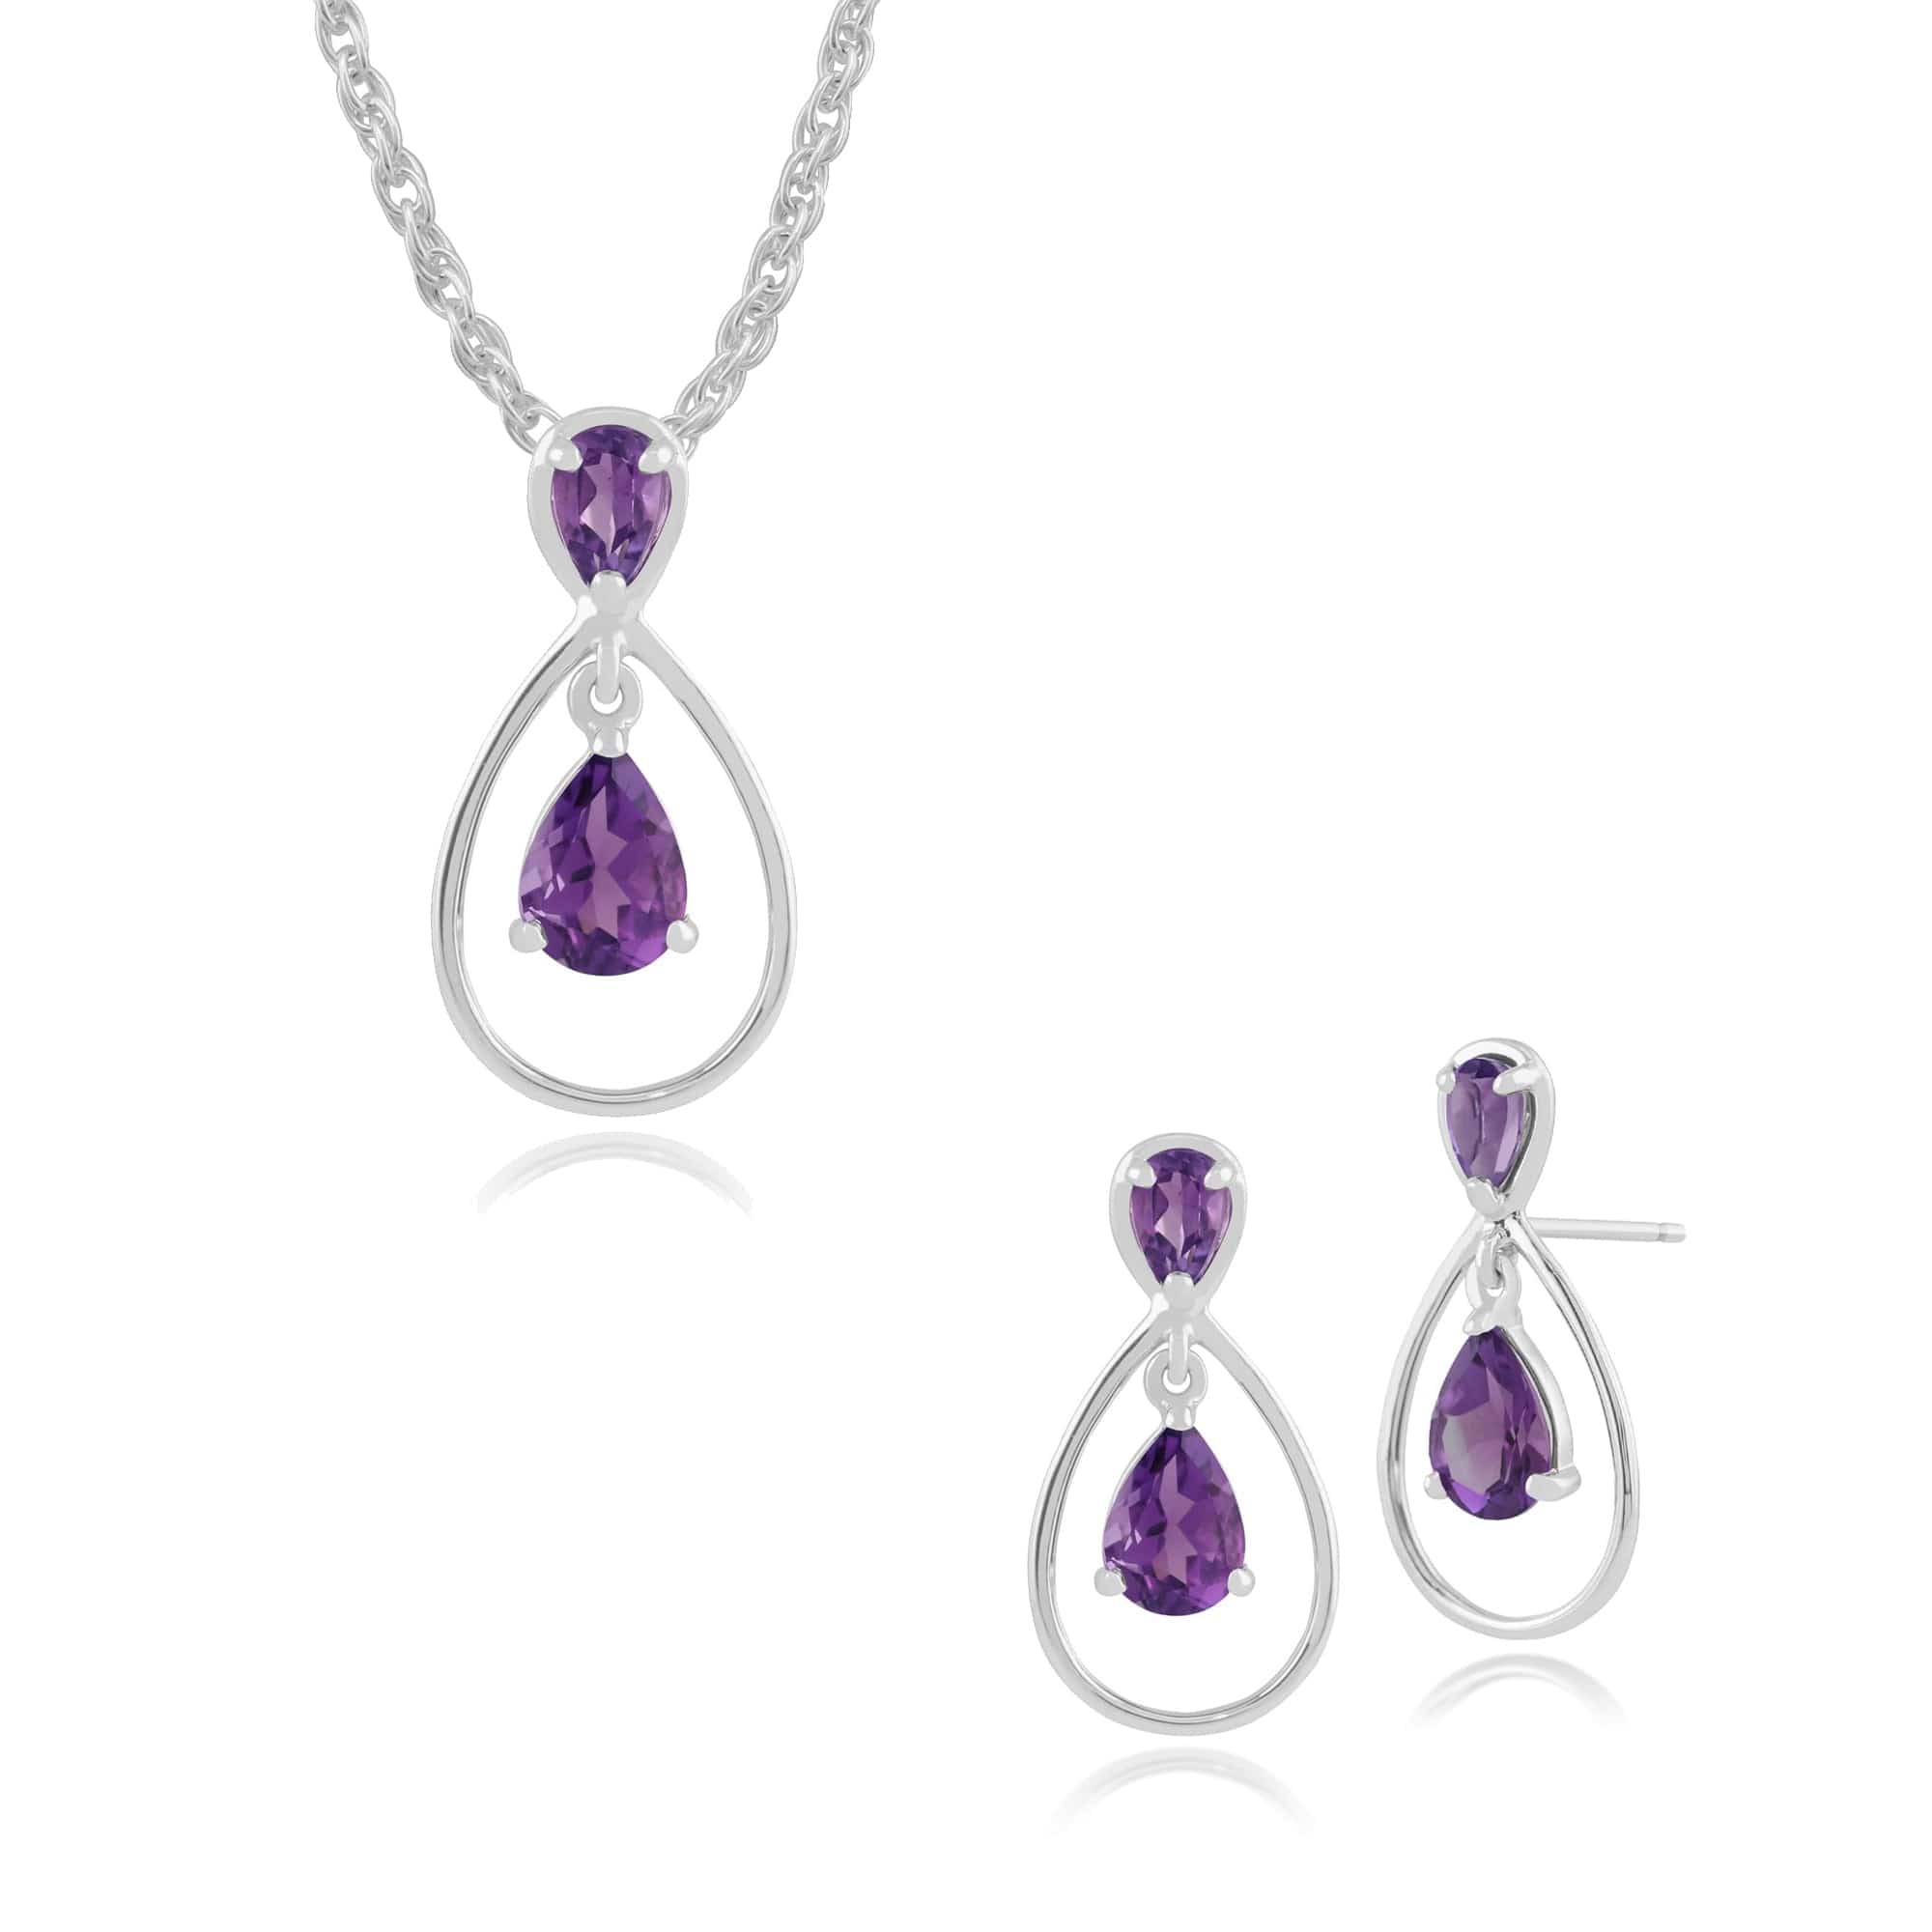 162E0126019-162P0114019 Classic Pear Amethyst Halo Drop Earrings & Pendant Set in 9ct White Gold 1